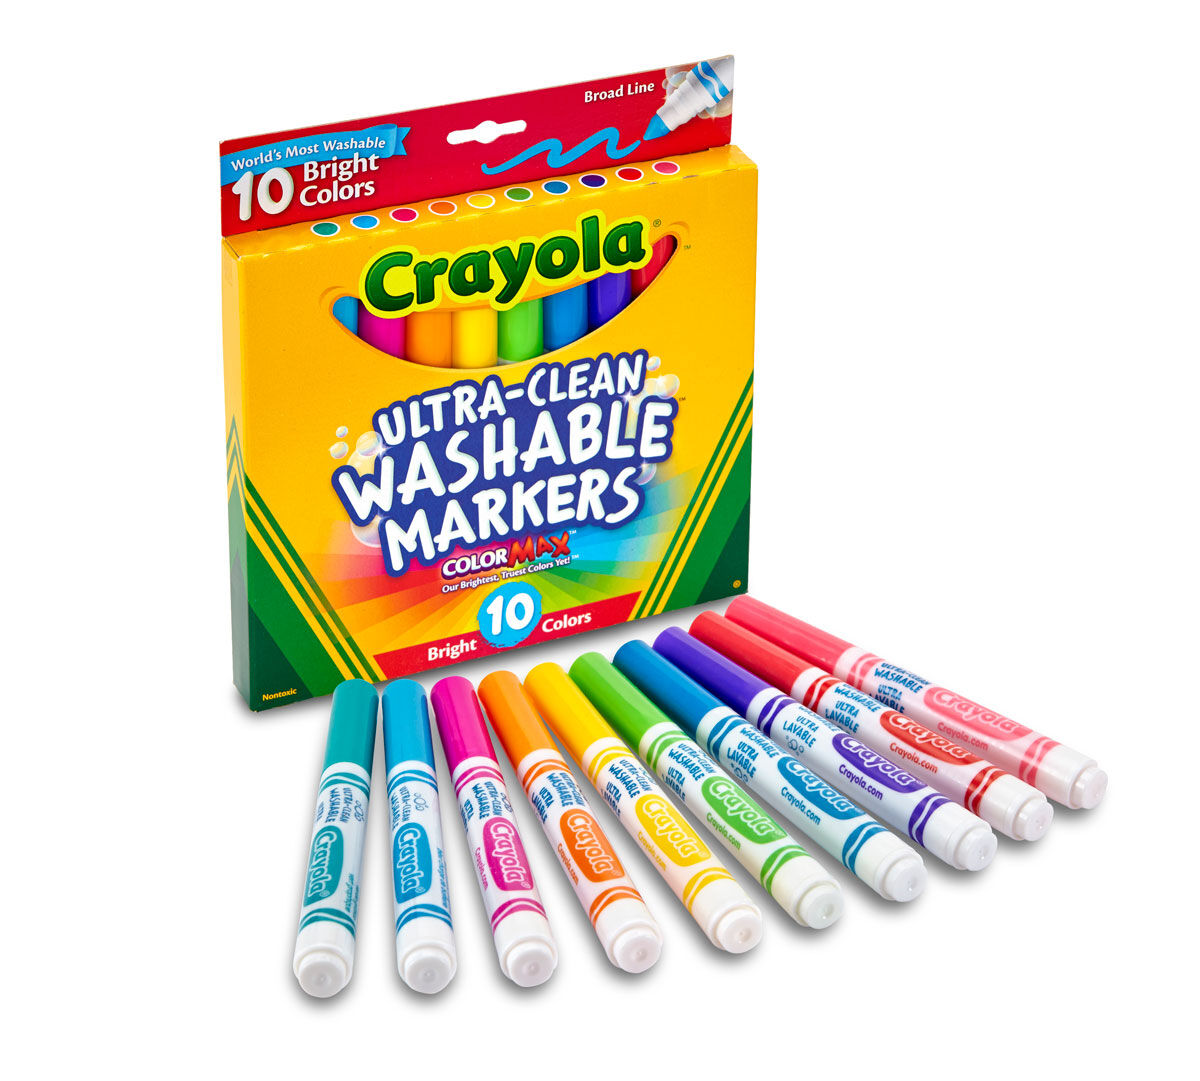 Crayola Ultra Clean Washable Multicultural Markers 10 Count Broad Line Assorted 